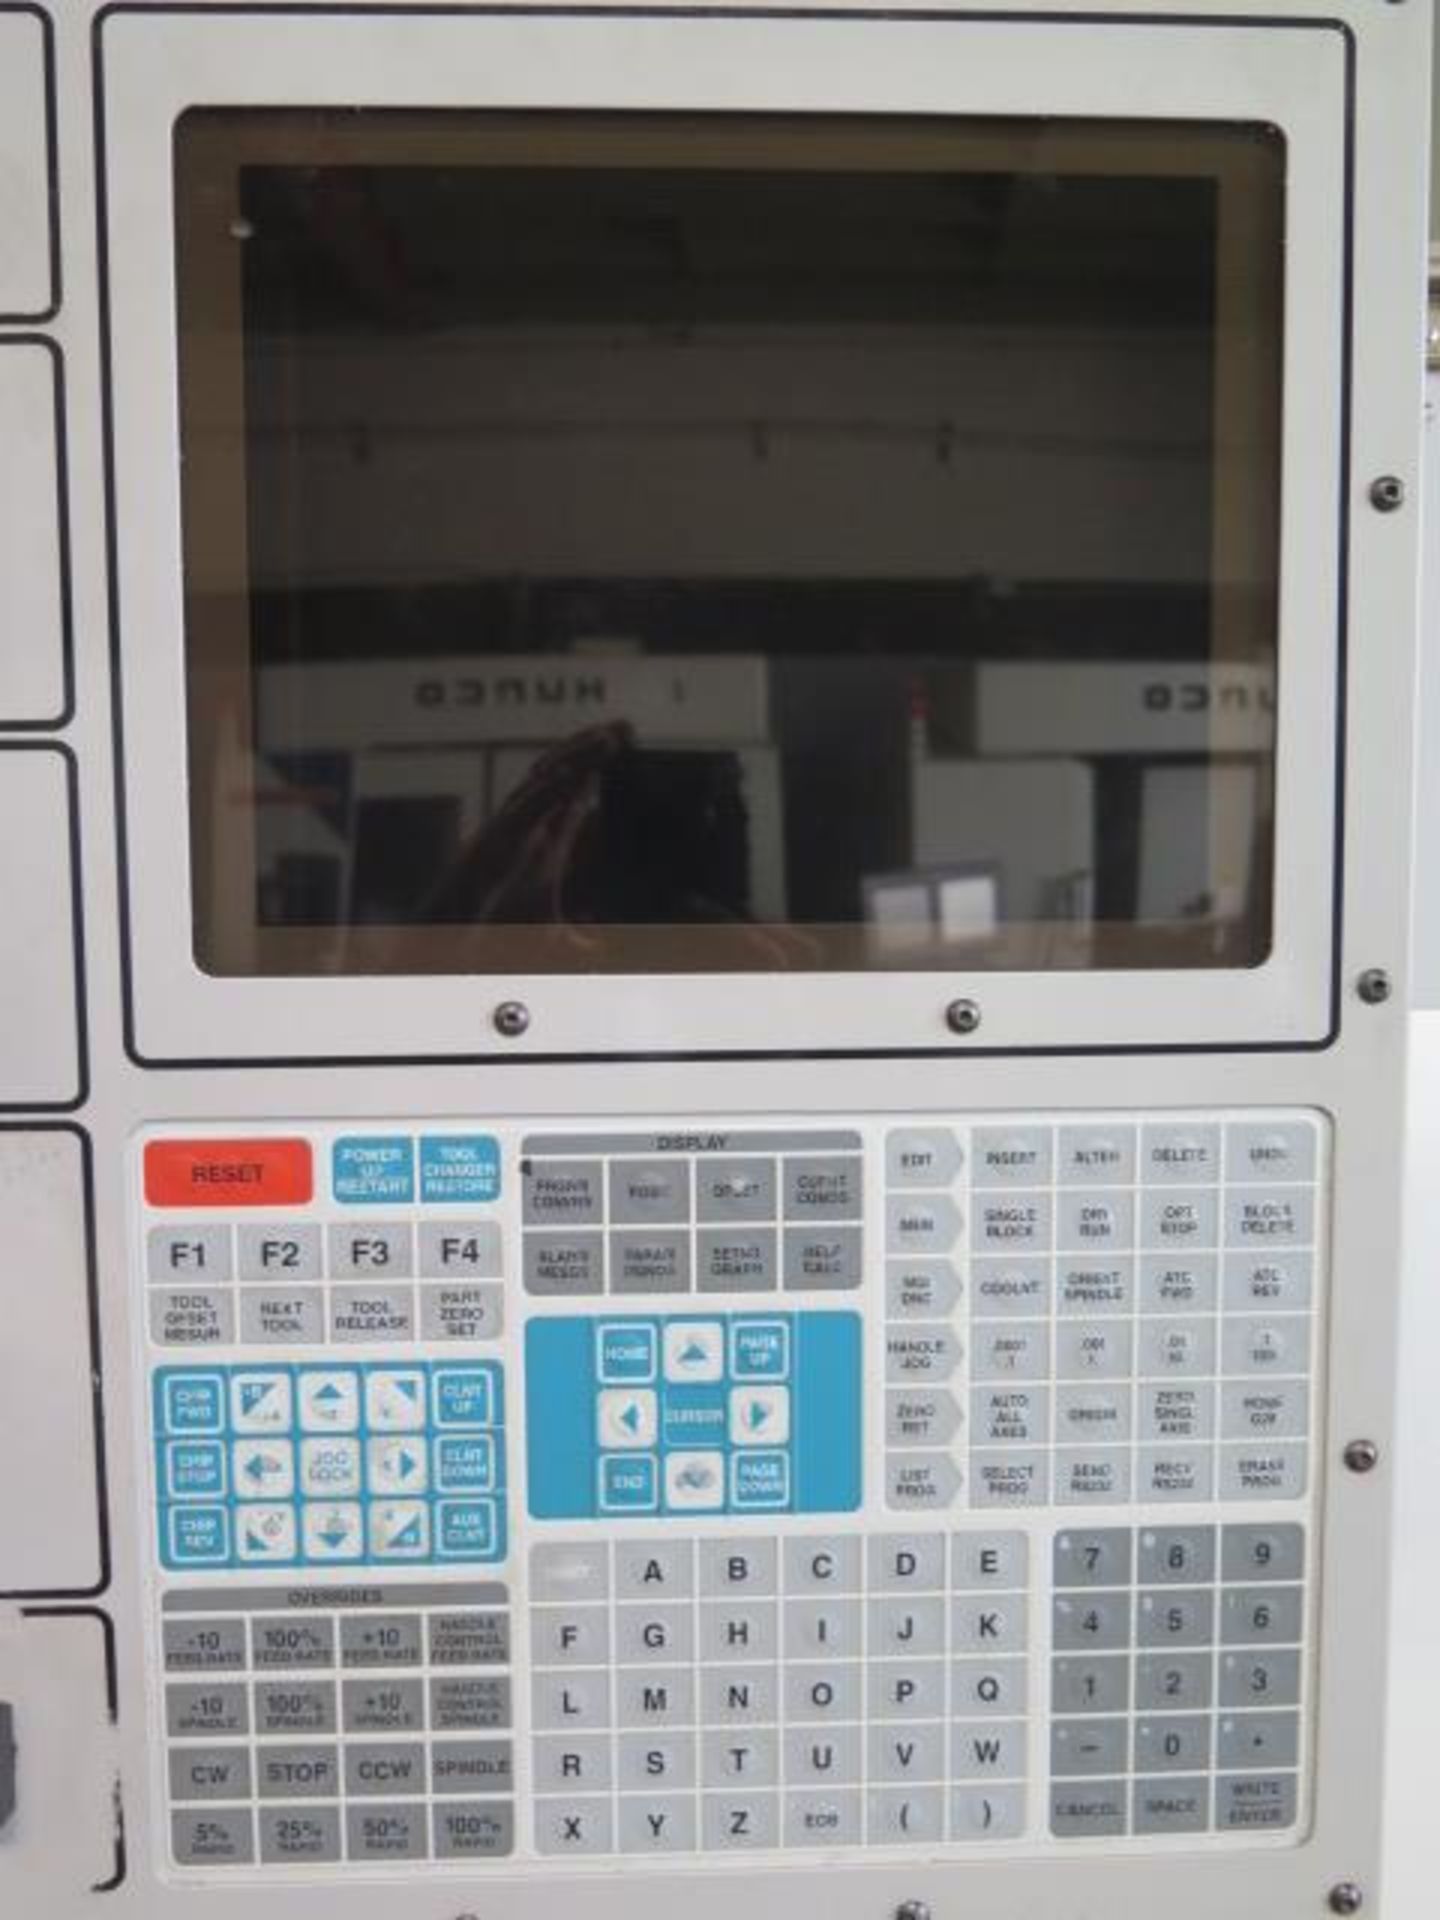 2000 Haas VF-5 4-Axis CNC Vertical Machining Center s/n 21677 w/ Haas Controls, SOLD AS IS - Image 8 of 20